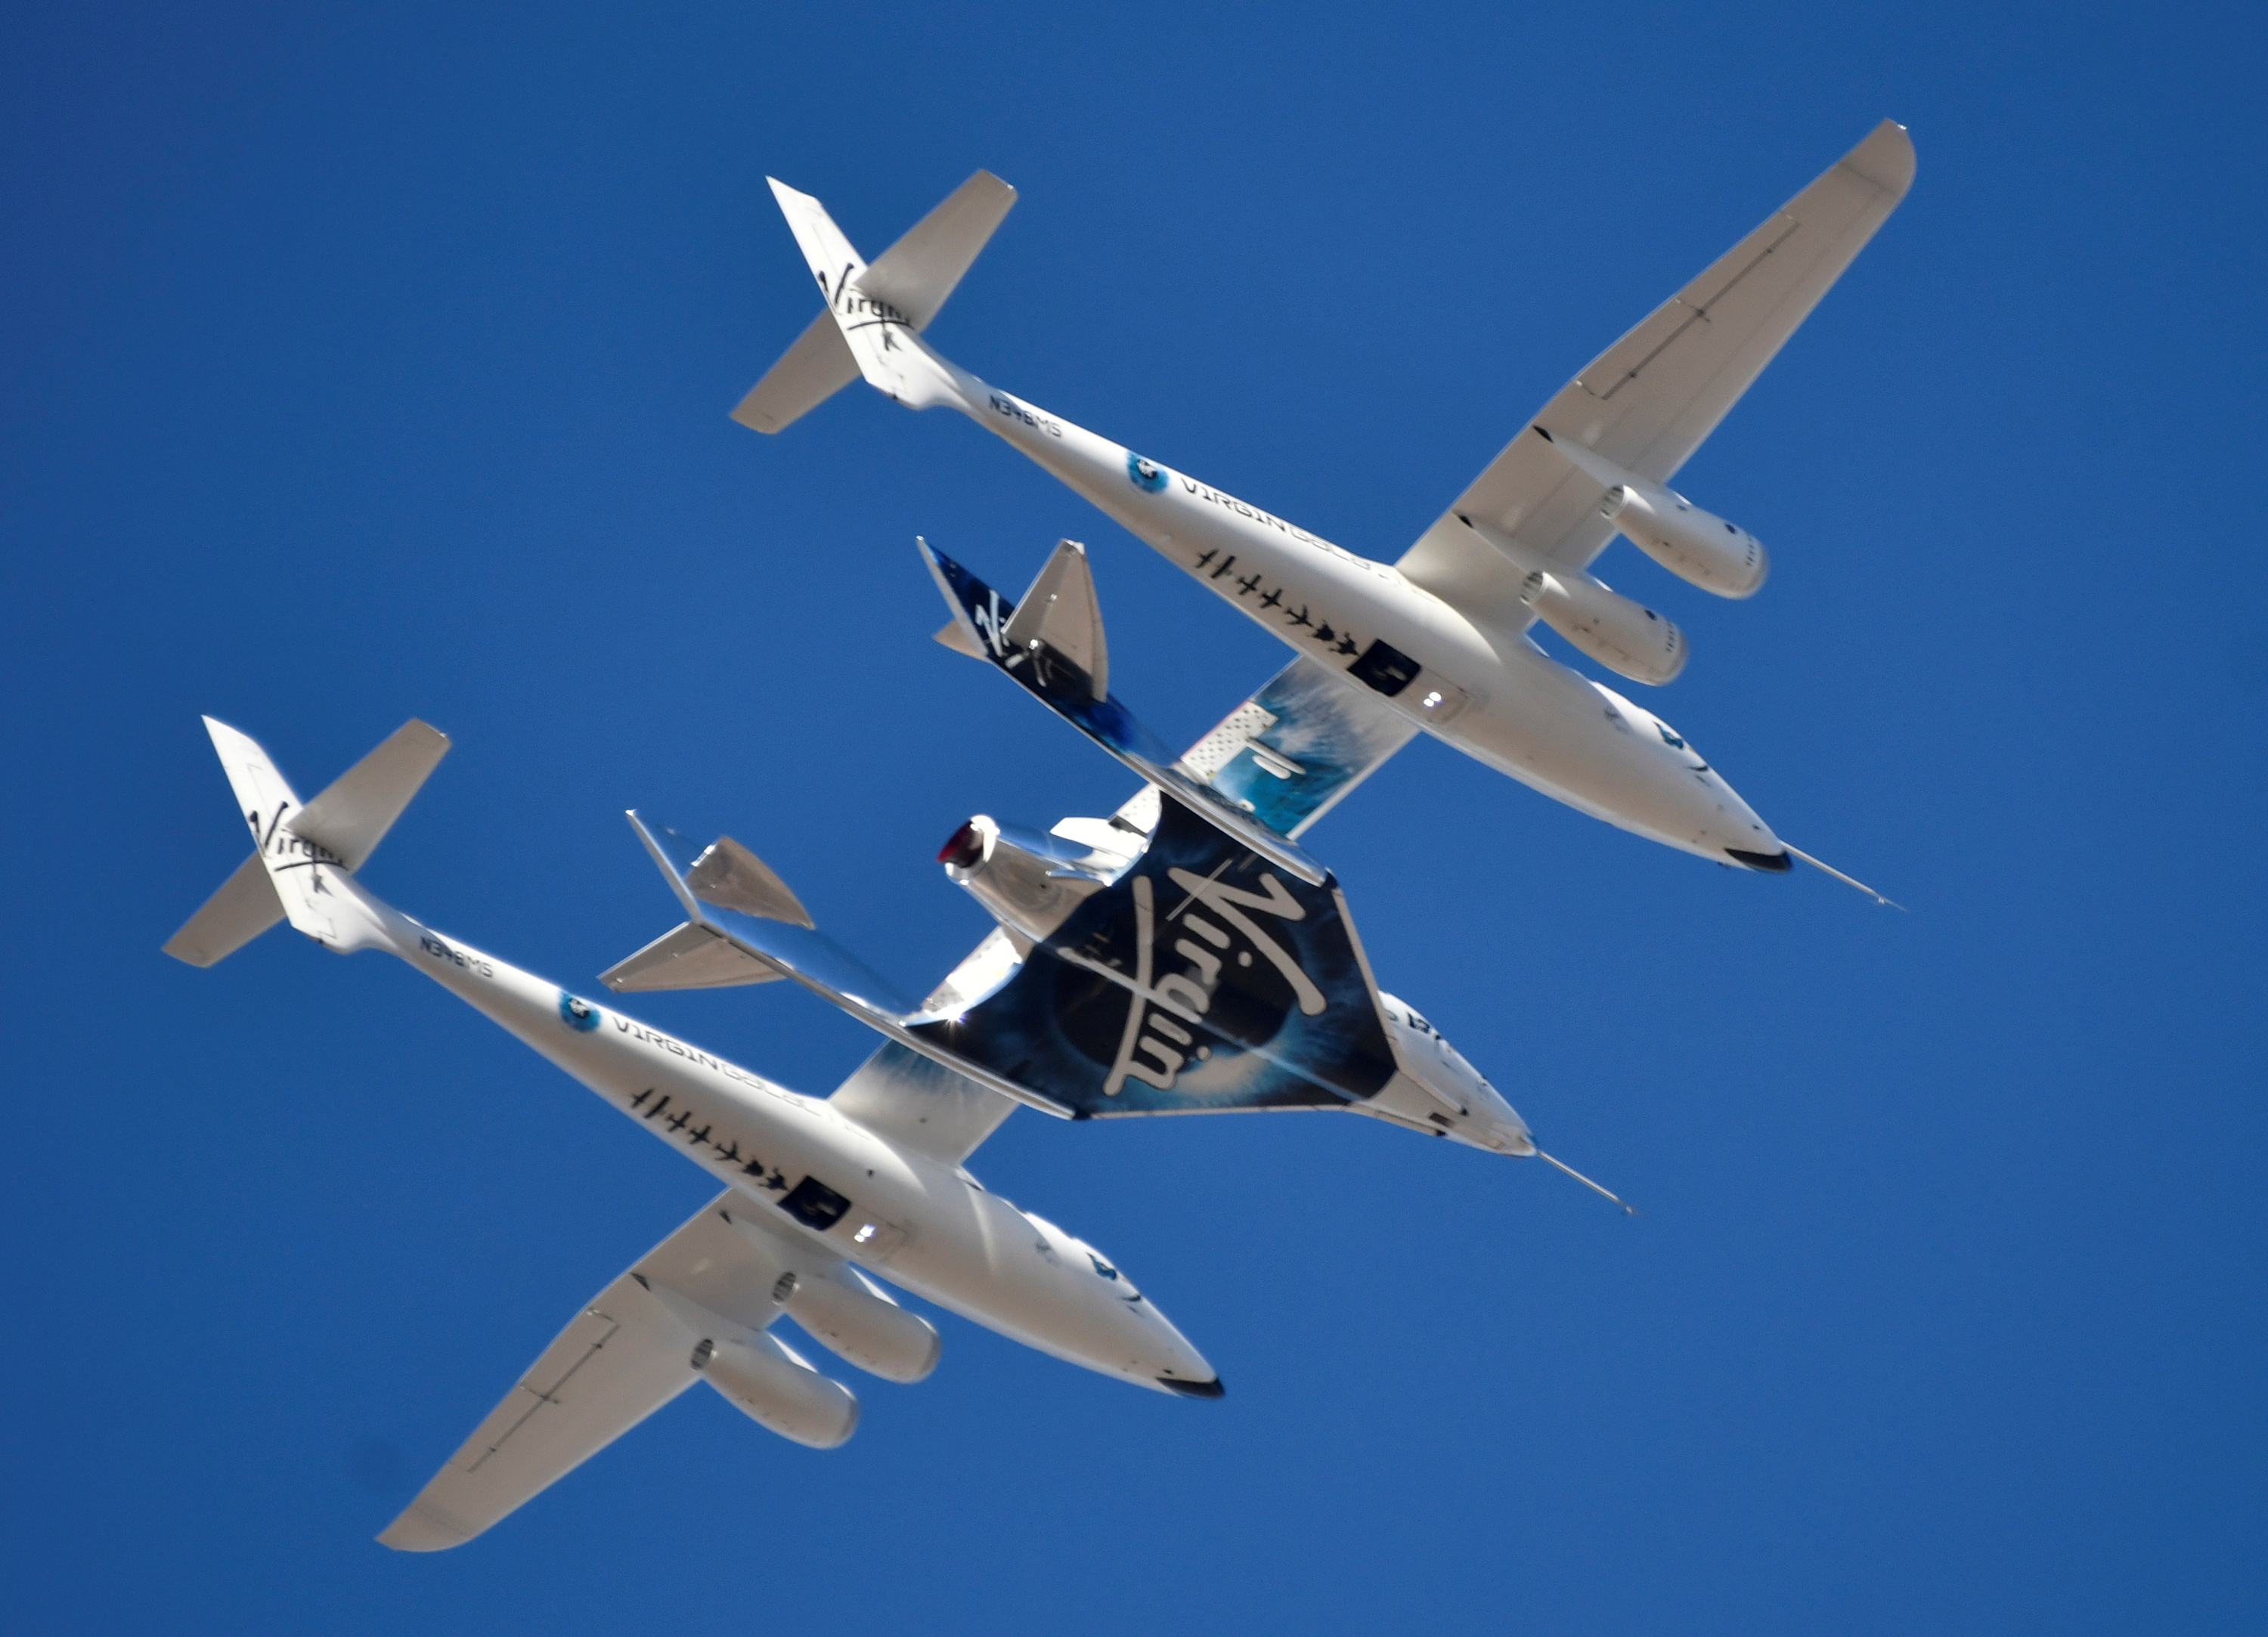 Virgin Galactic rocket plane, the WhiteKnightTwo carrier airplane, with SpaceShipTwo passenger craft takes off from Mojave Air and Space Port in Mojave, California, U.S., February 22, 2019.  REUTERS/Gene Blevins/File Photo